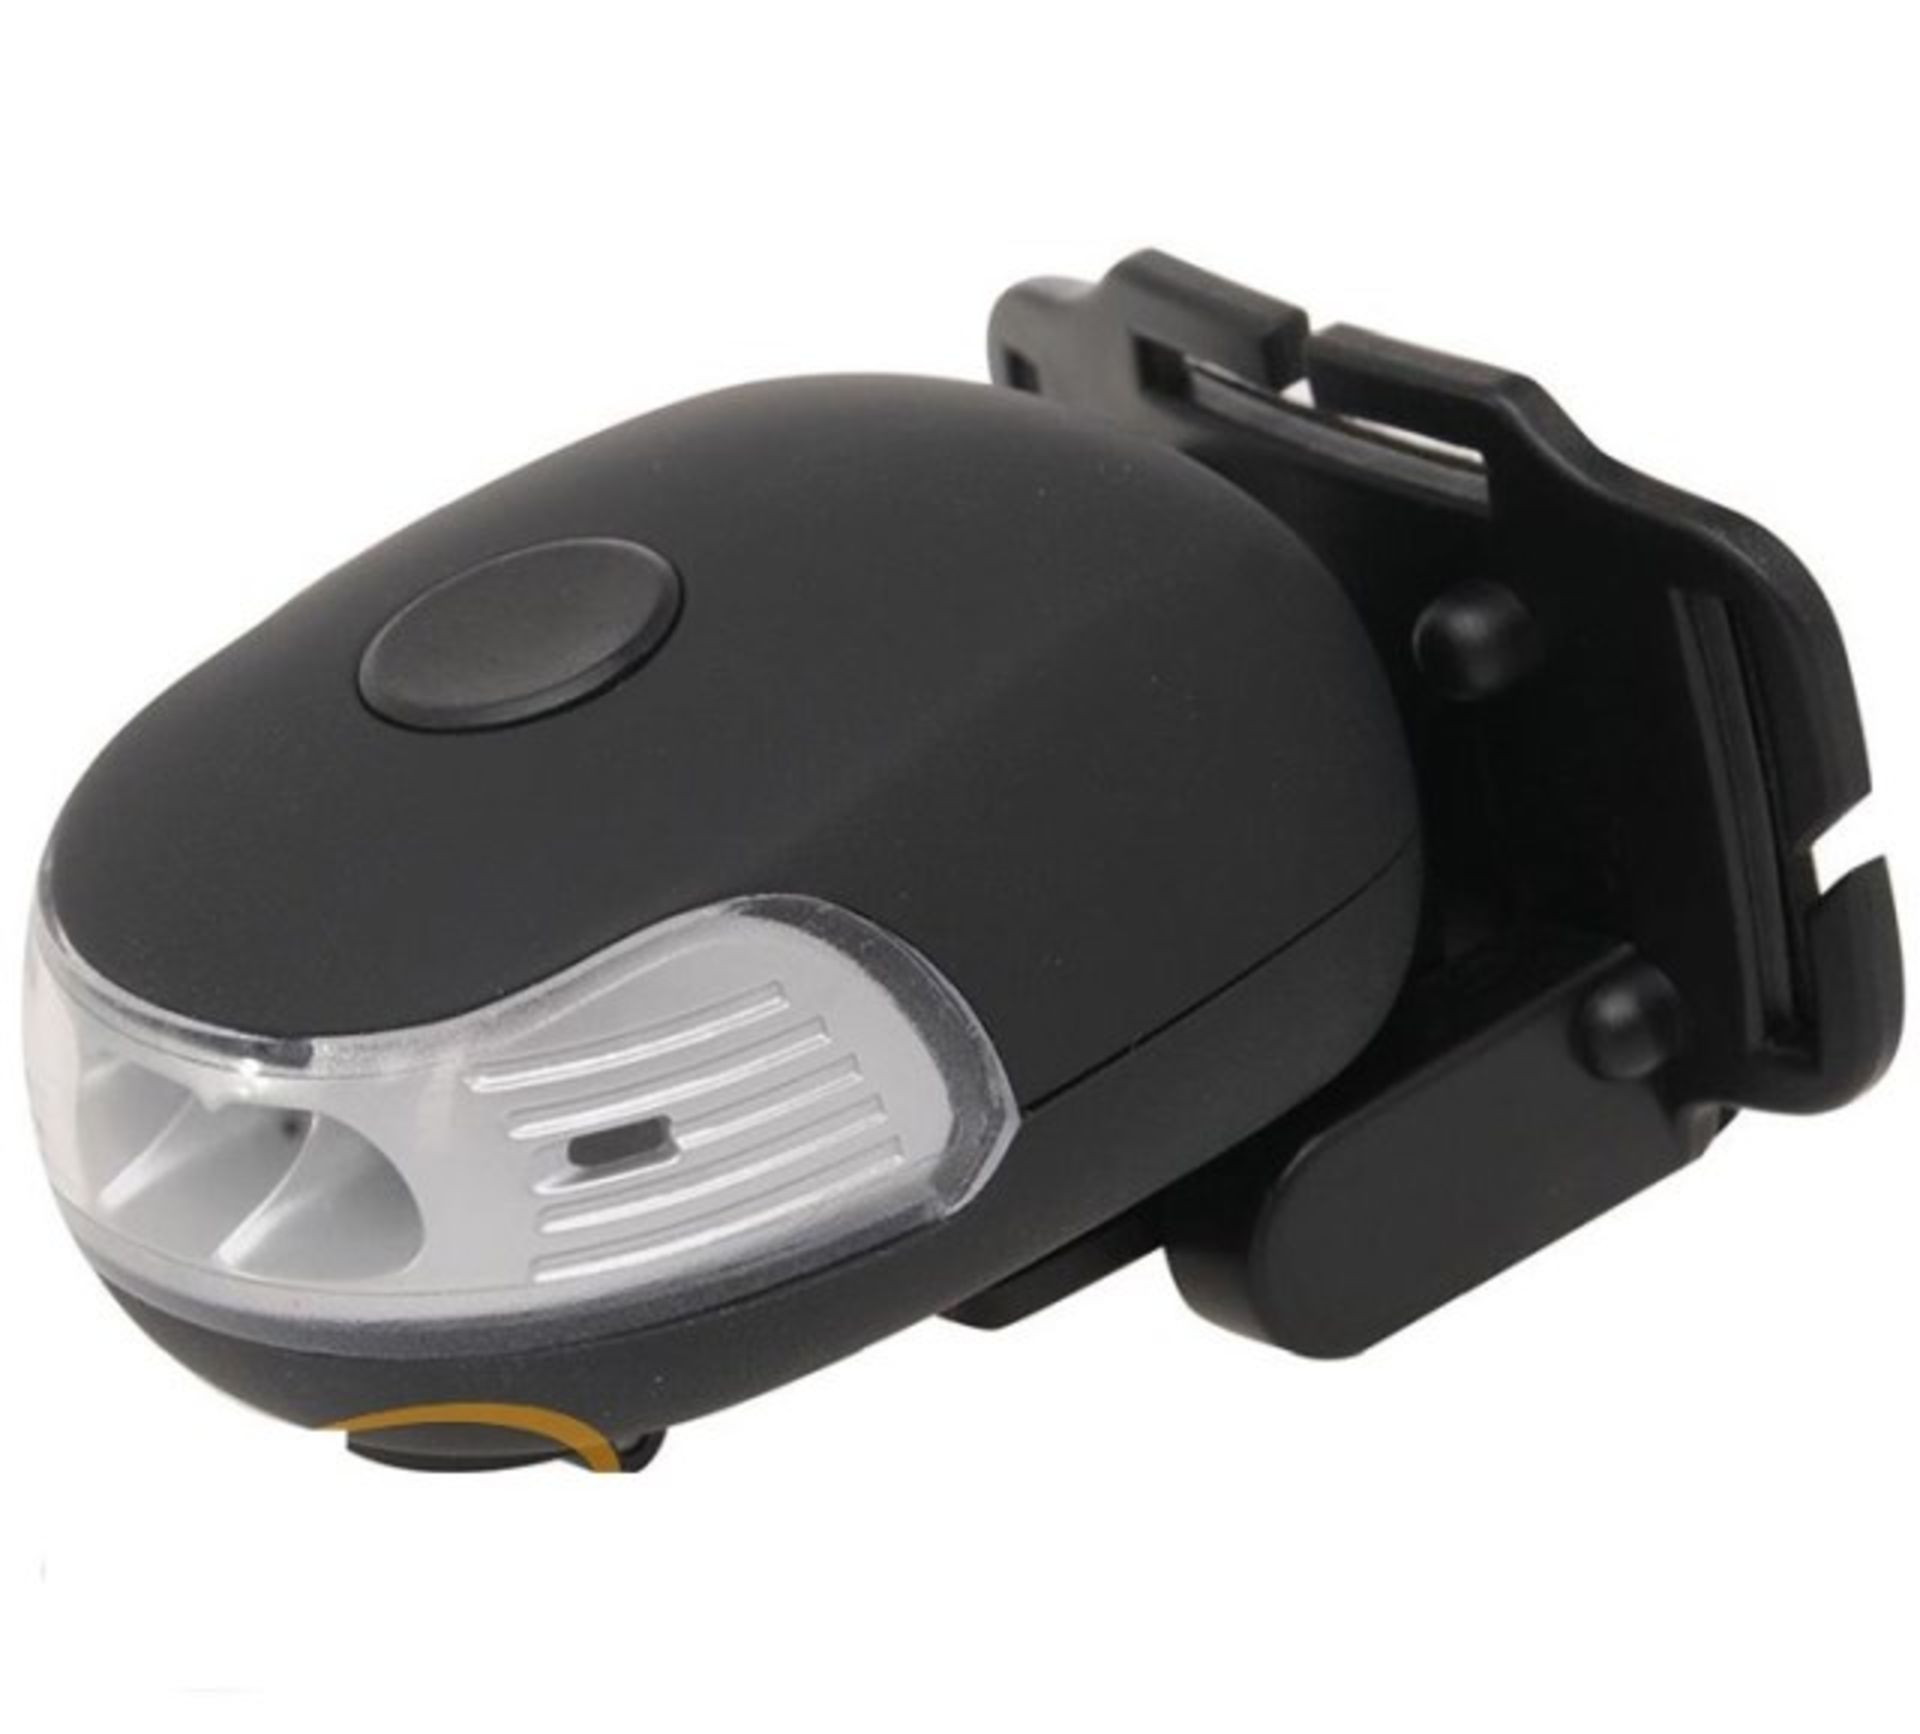 V *TRADE QTY* Brand New Tritronic Optrimax Wind-Up Head Lamp X 4 YOUR BID PRICE TO BE MULTIPLIED